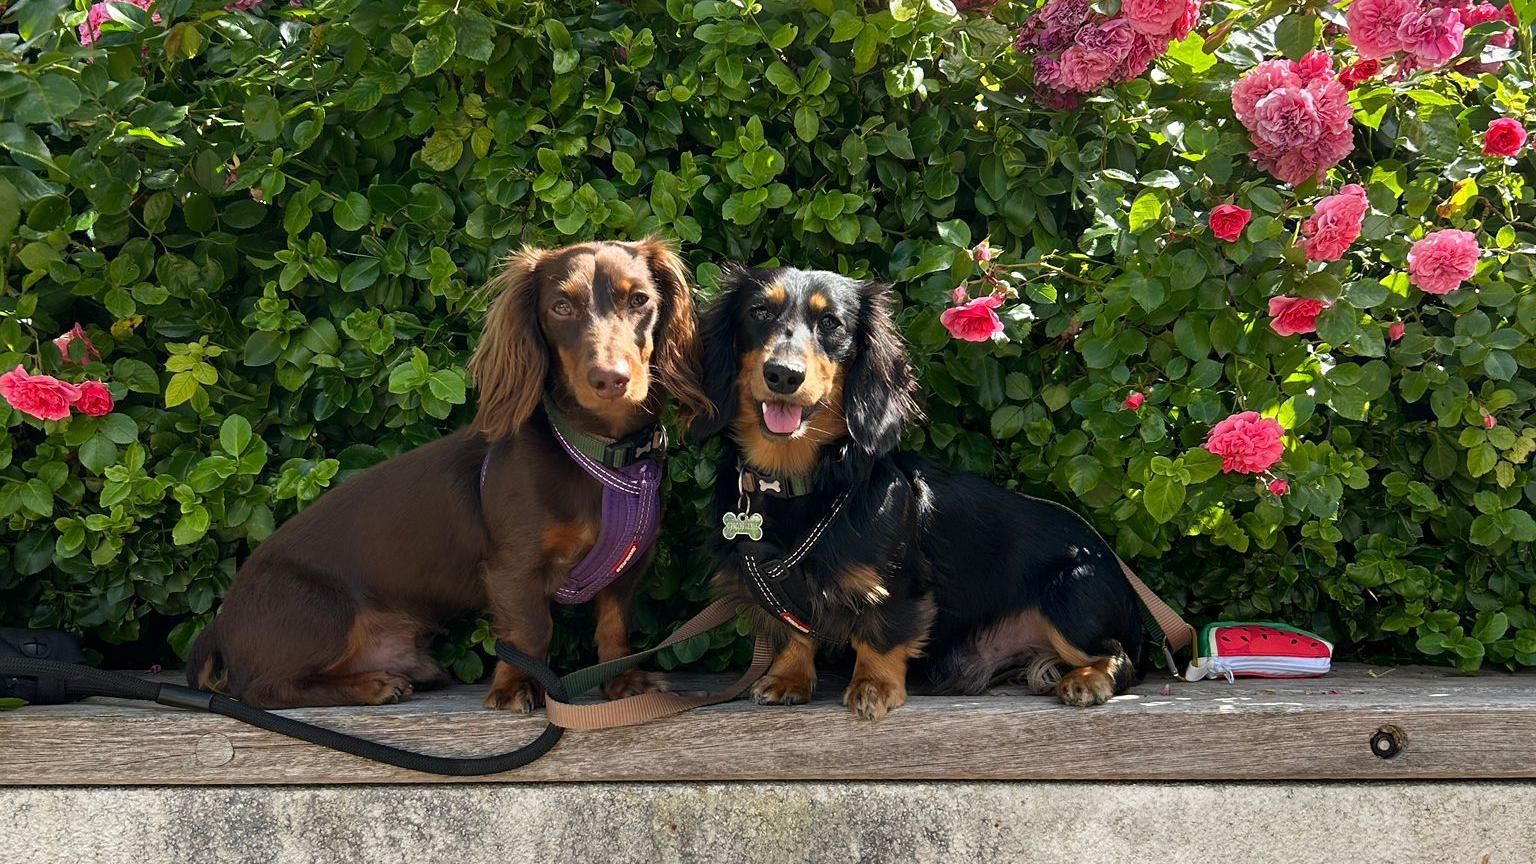 A pair of long-haired sausage dogs sat on a wall in front of some flowers